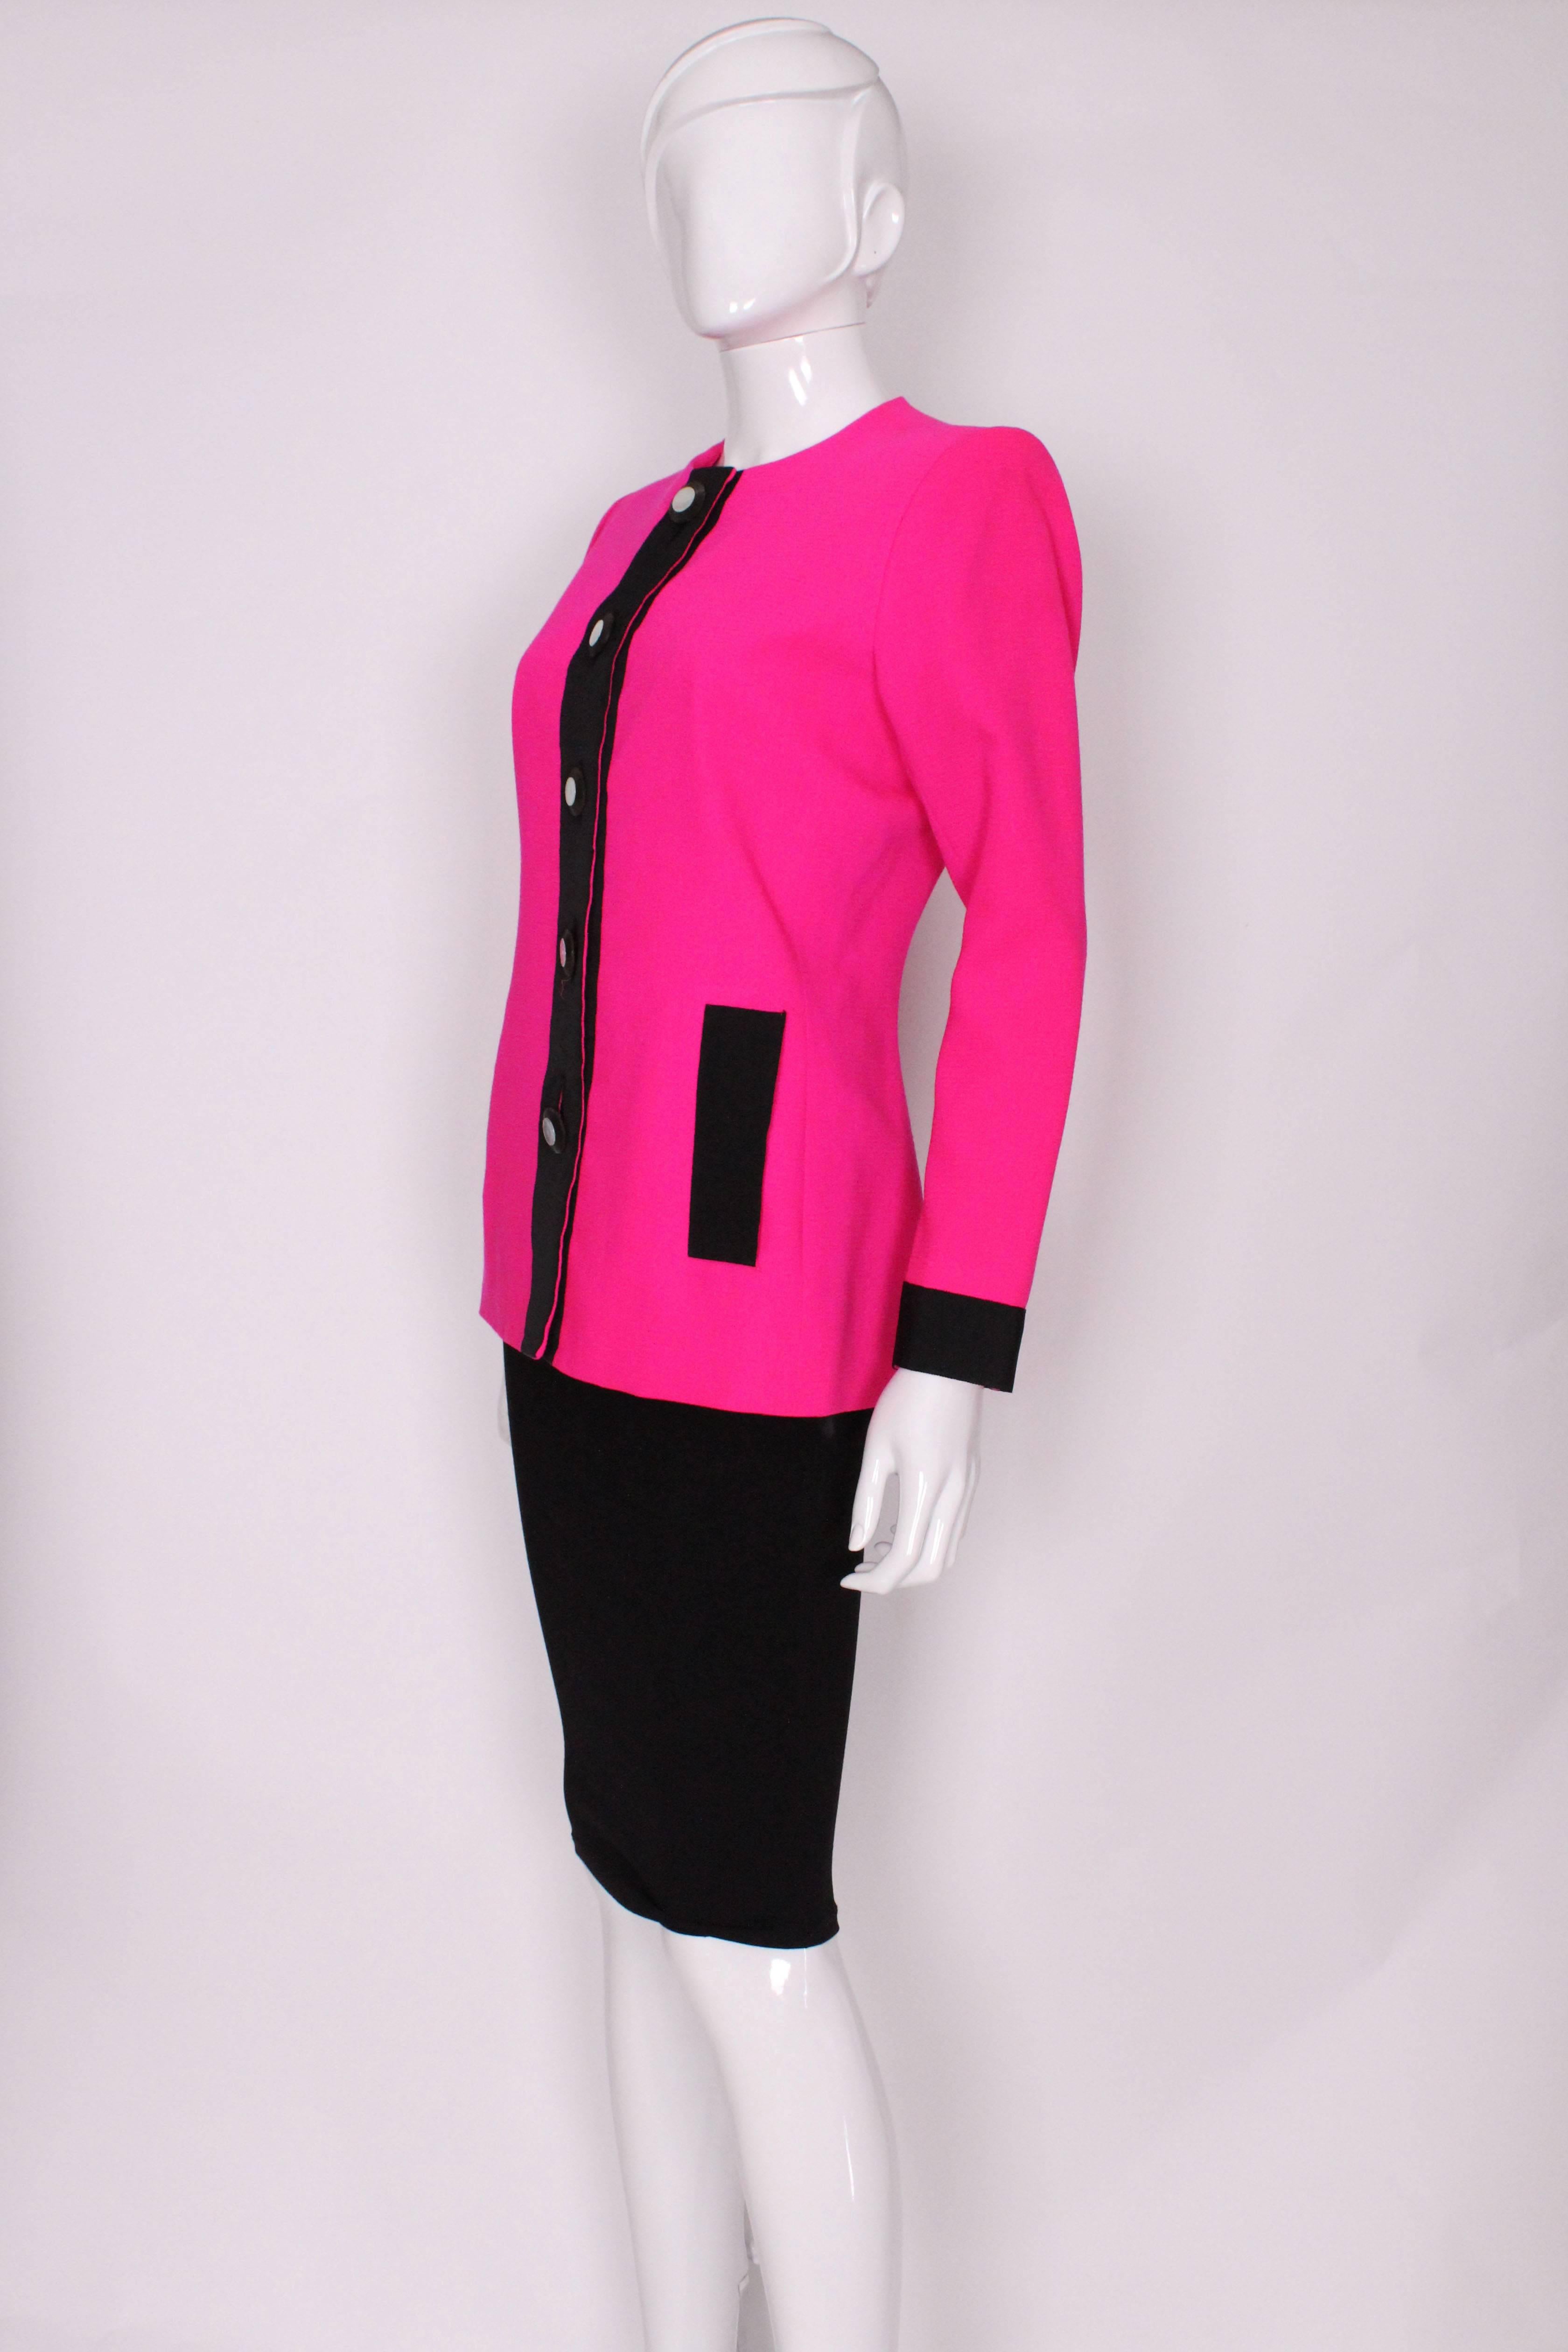 Women's 1980s YSL Pink and Black Jacket